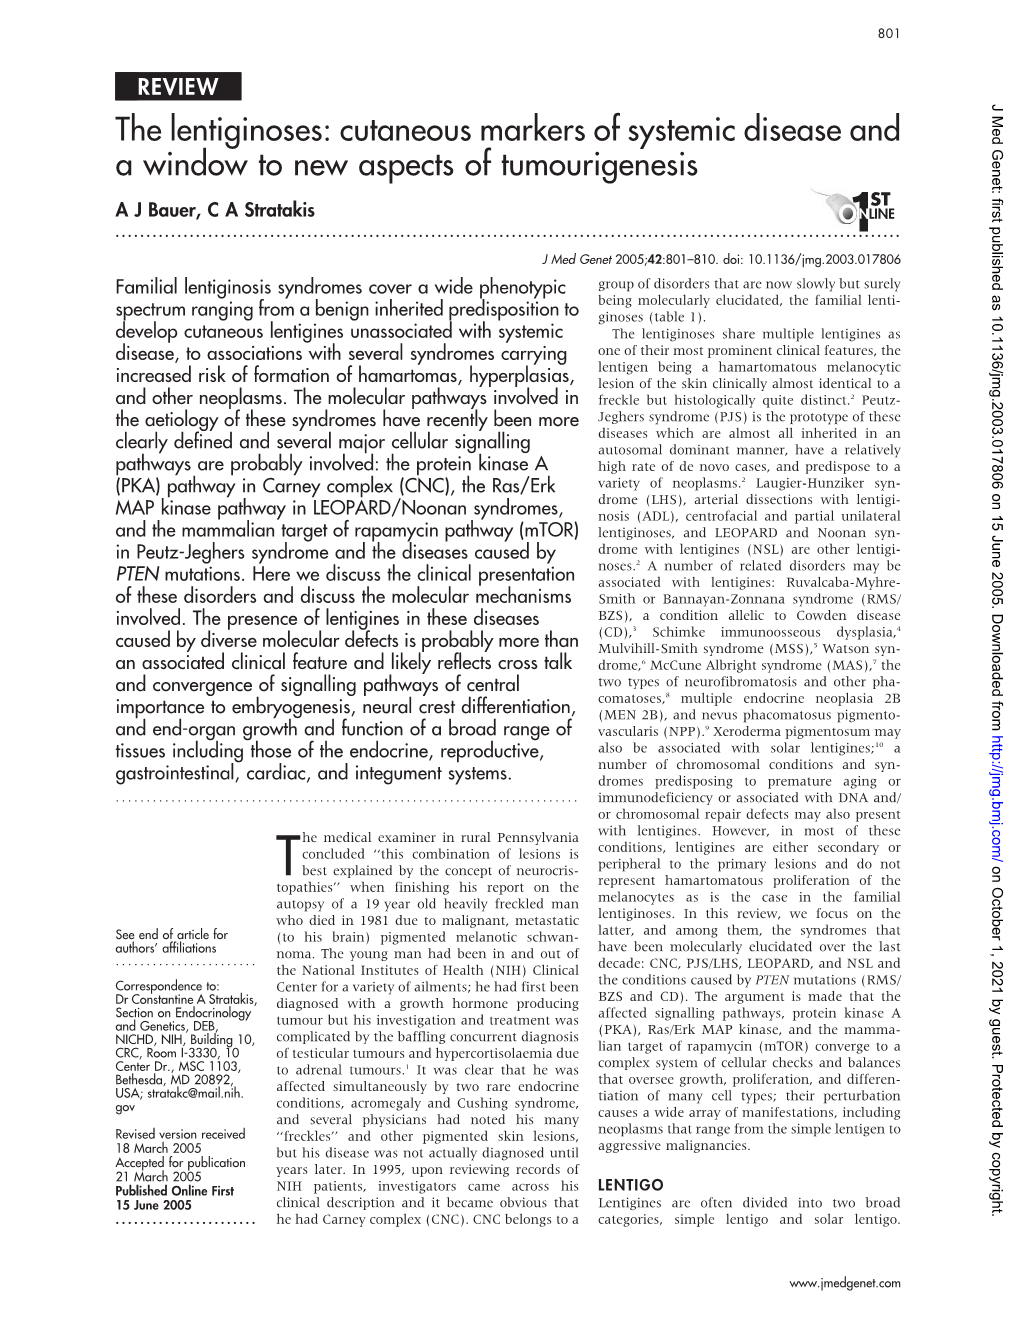 The Lentiginoses: Cutaneous Markers of Systemic Disease and a Window to New Aspects of Tumourigenesis